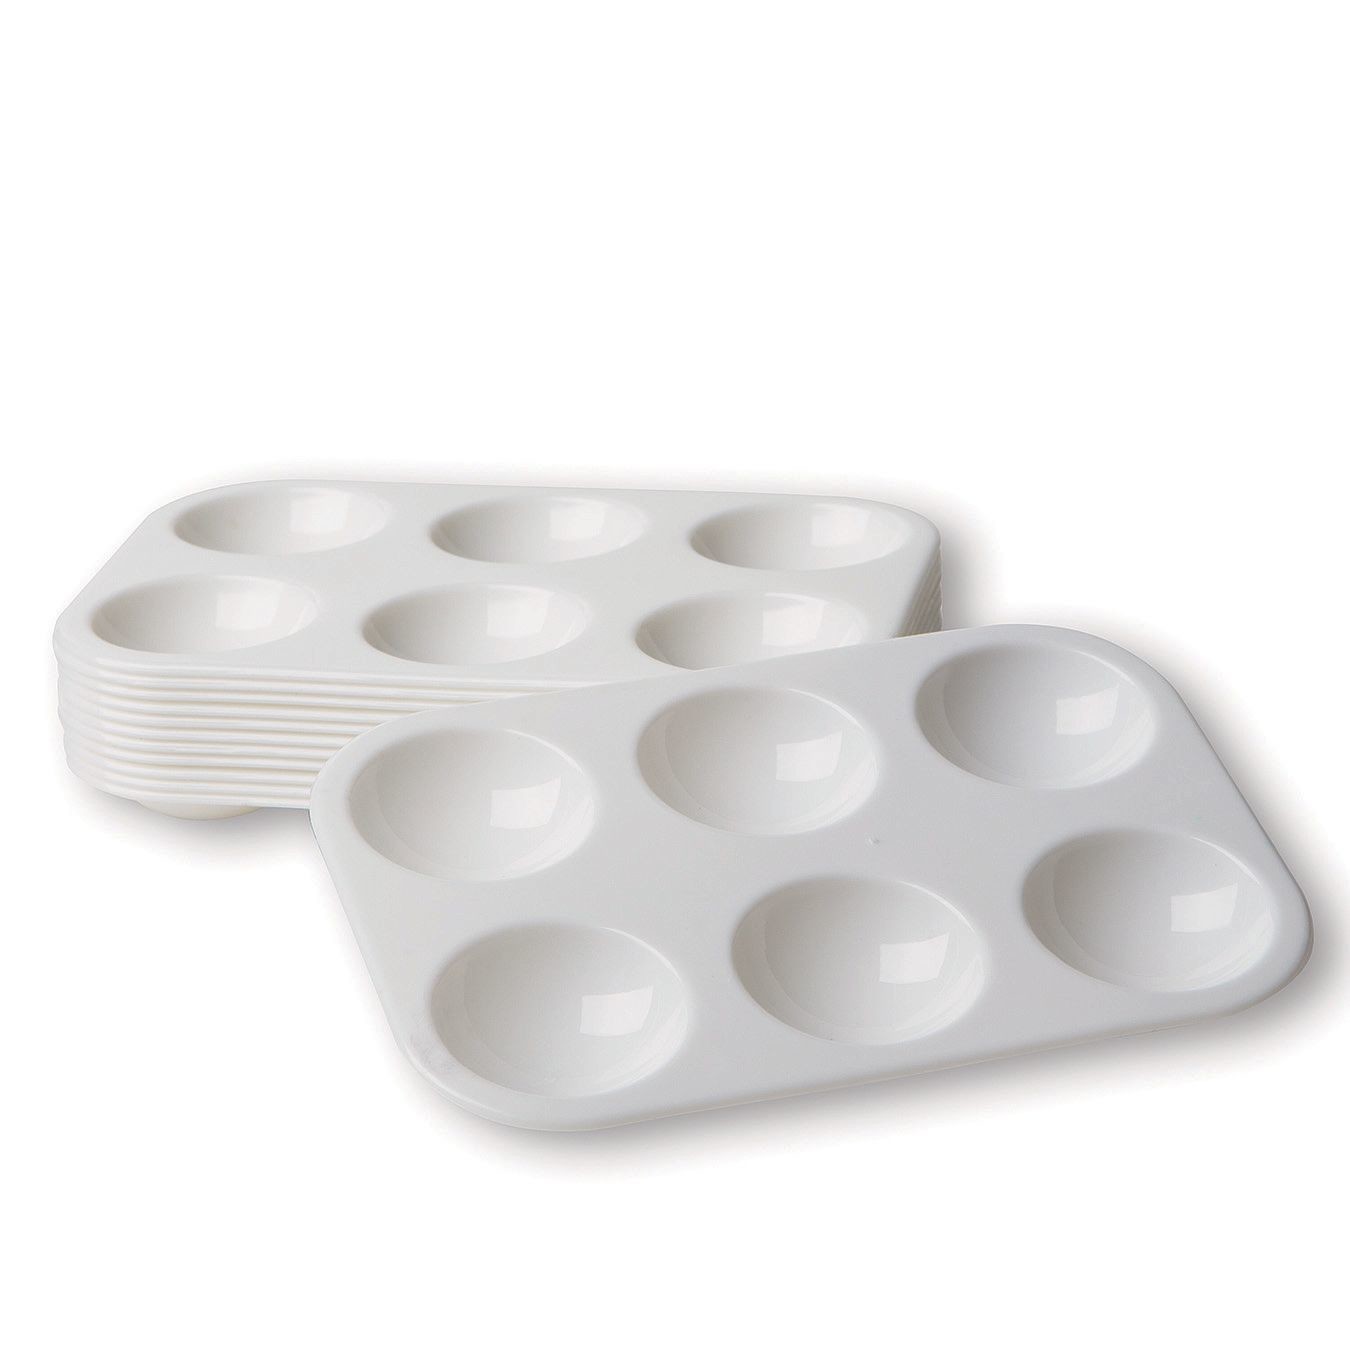 Buy Large Assorted Color Multi Purpose Plastic Trays at S&S Worldwide